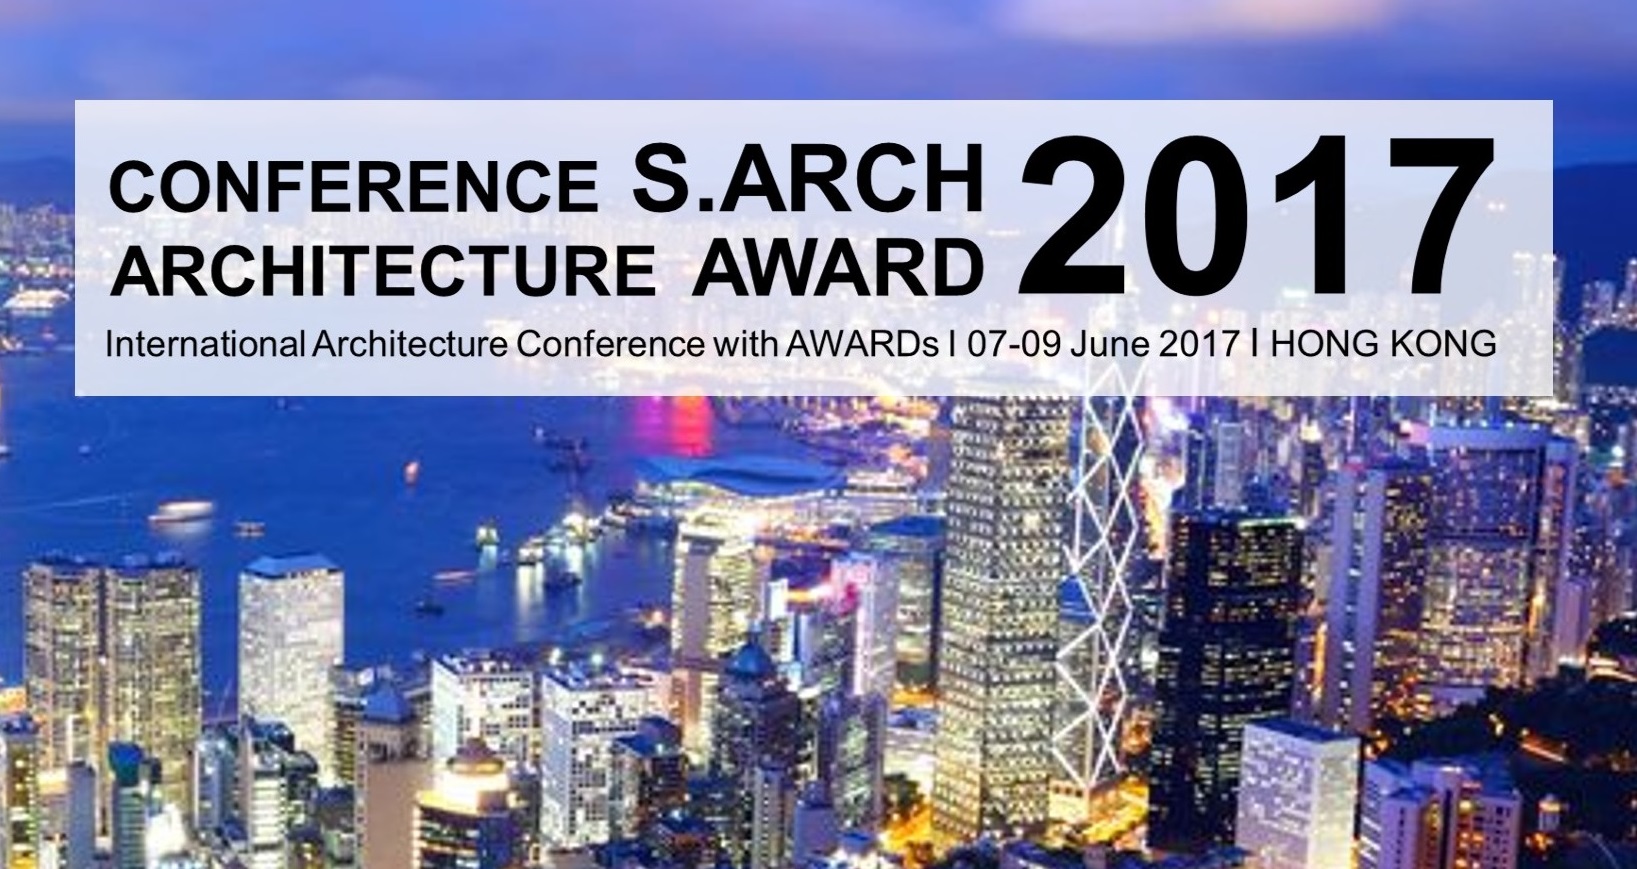 S.ARCH 2017 - The 4th International Conference on Architecture and Built Environment, The University of Hong Kong, Hong Kong